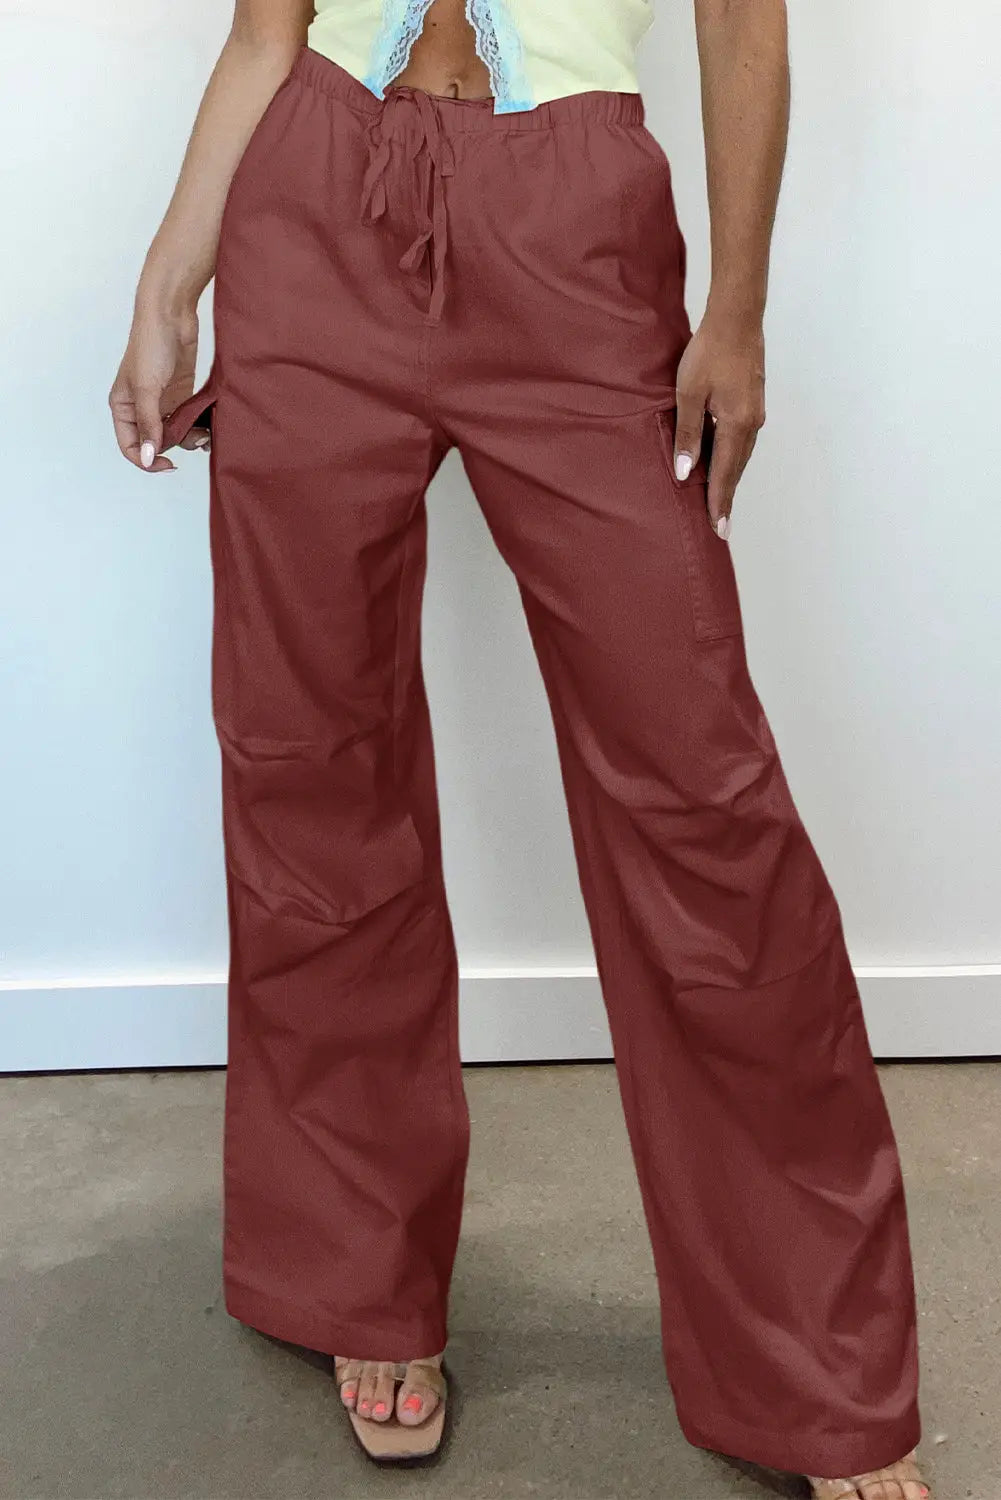 Mineral red solid color drawstring waist wide leg cargo pants - s